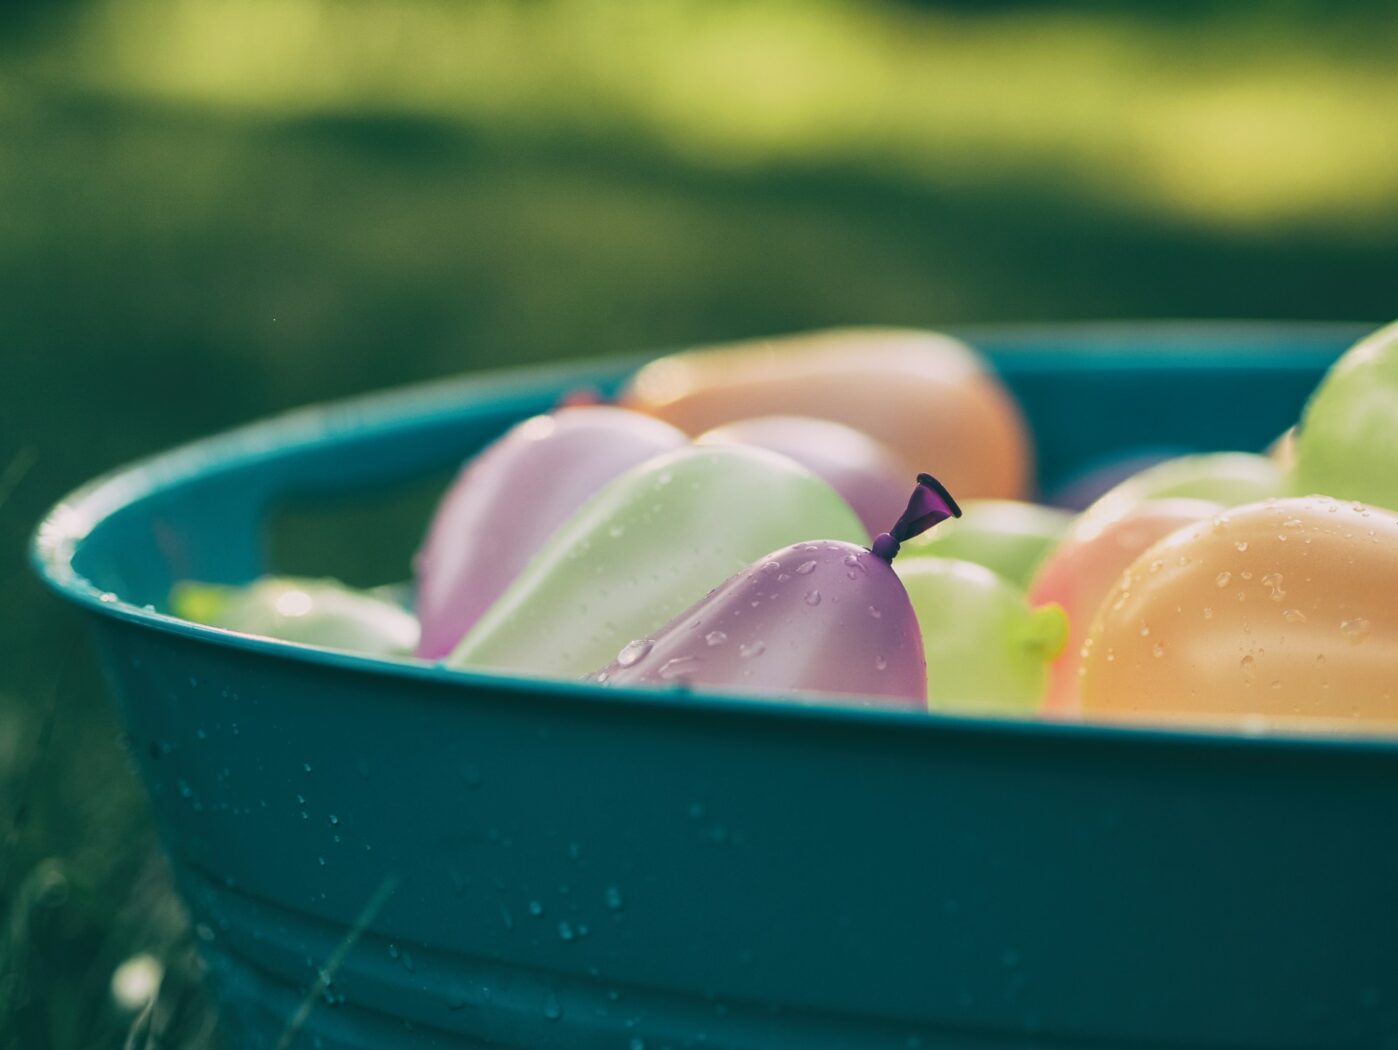 Water balloons in a bucket